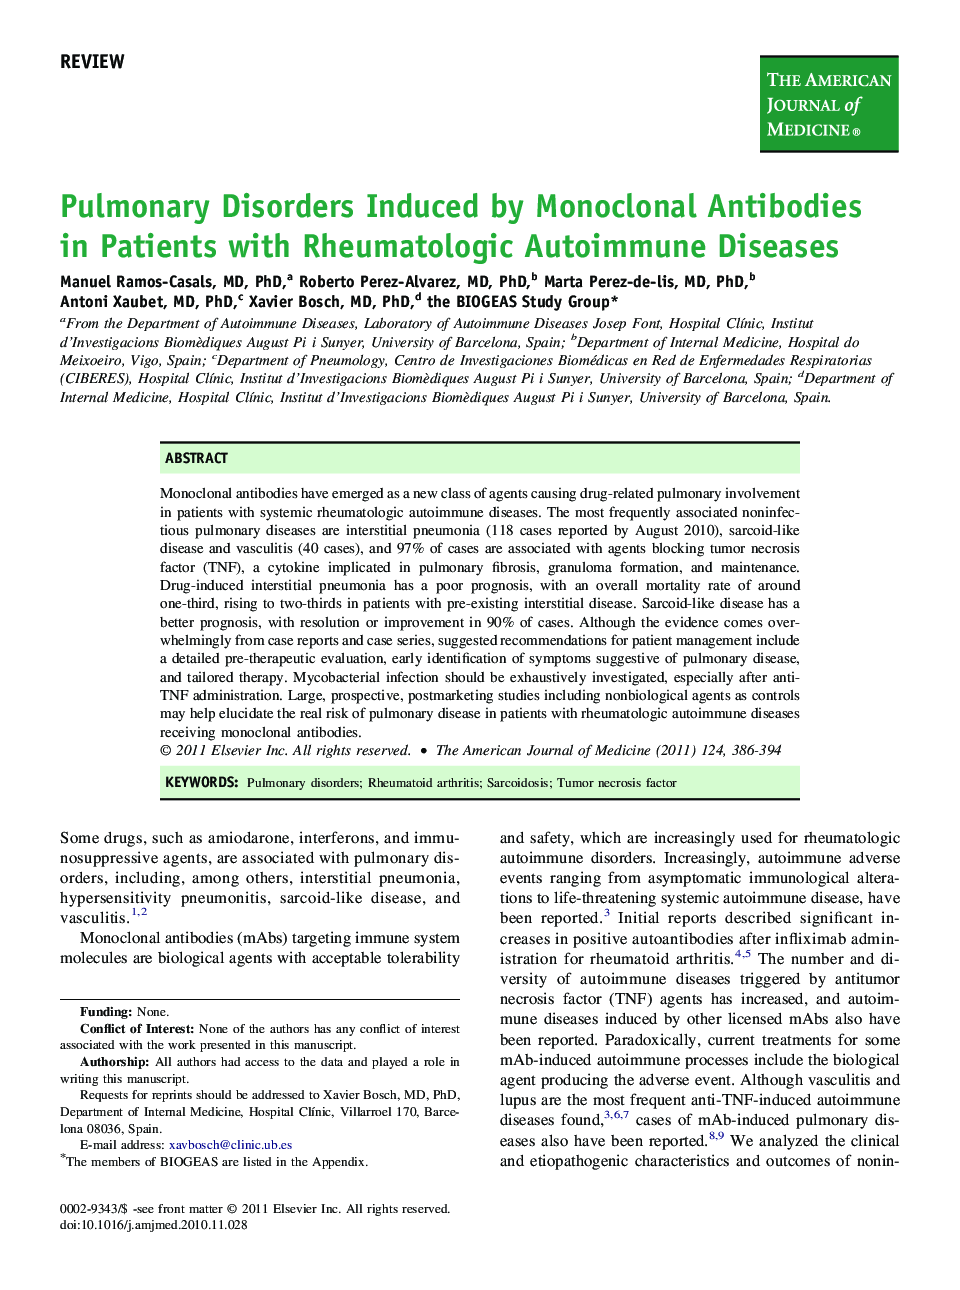 Pulmonary Disorders Induced by Monoclonal Antibodies in Patients with Rheumatologic Autoimmune Diseases 